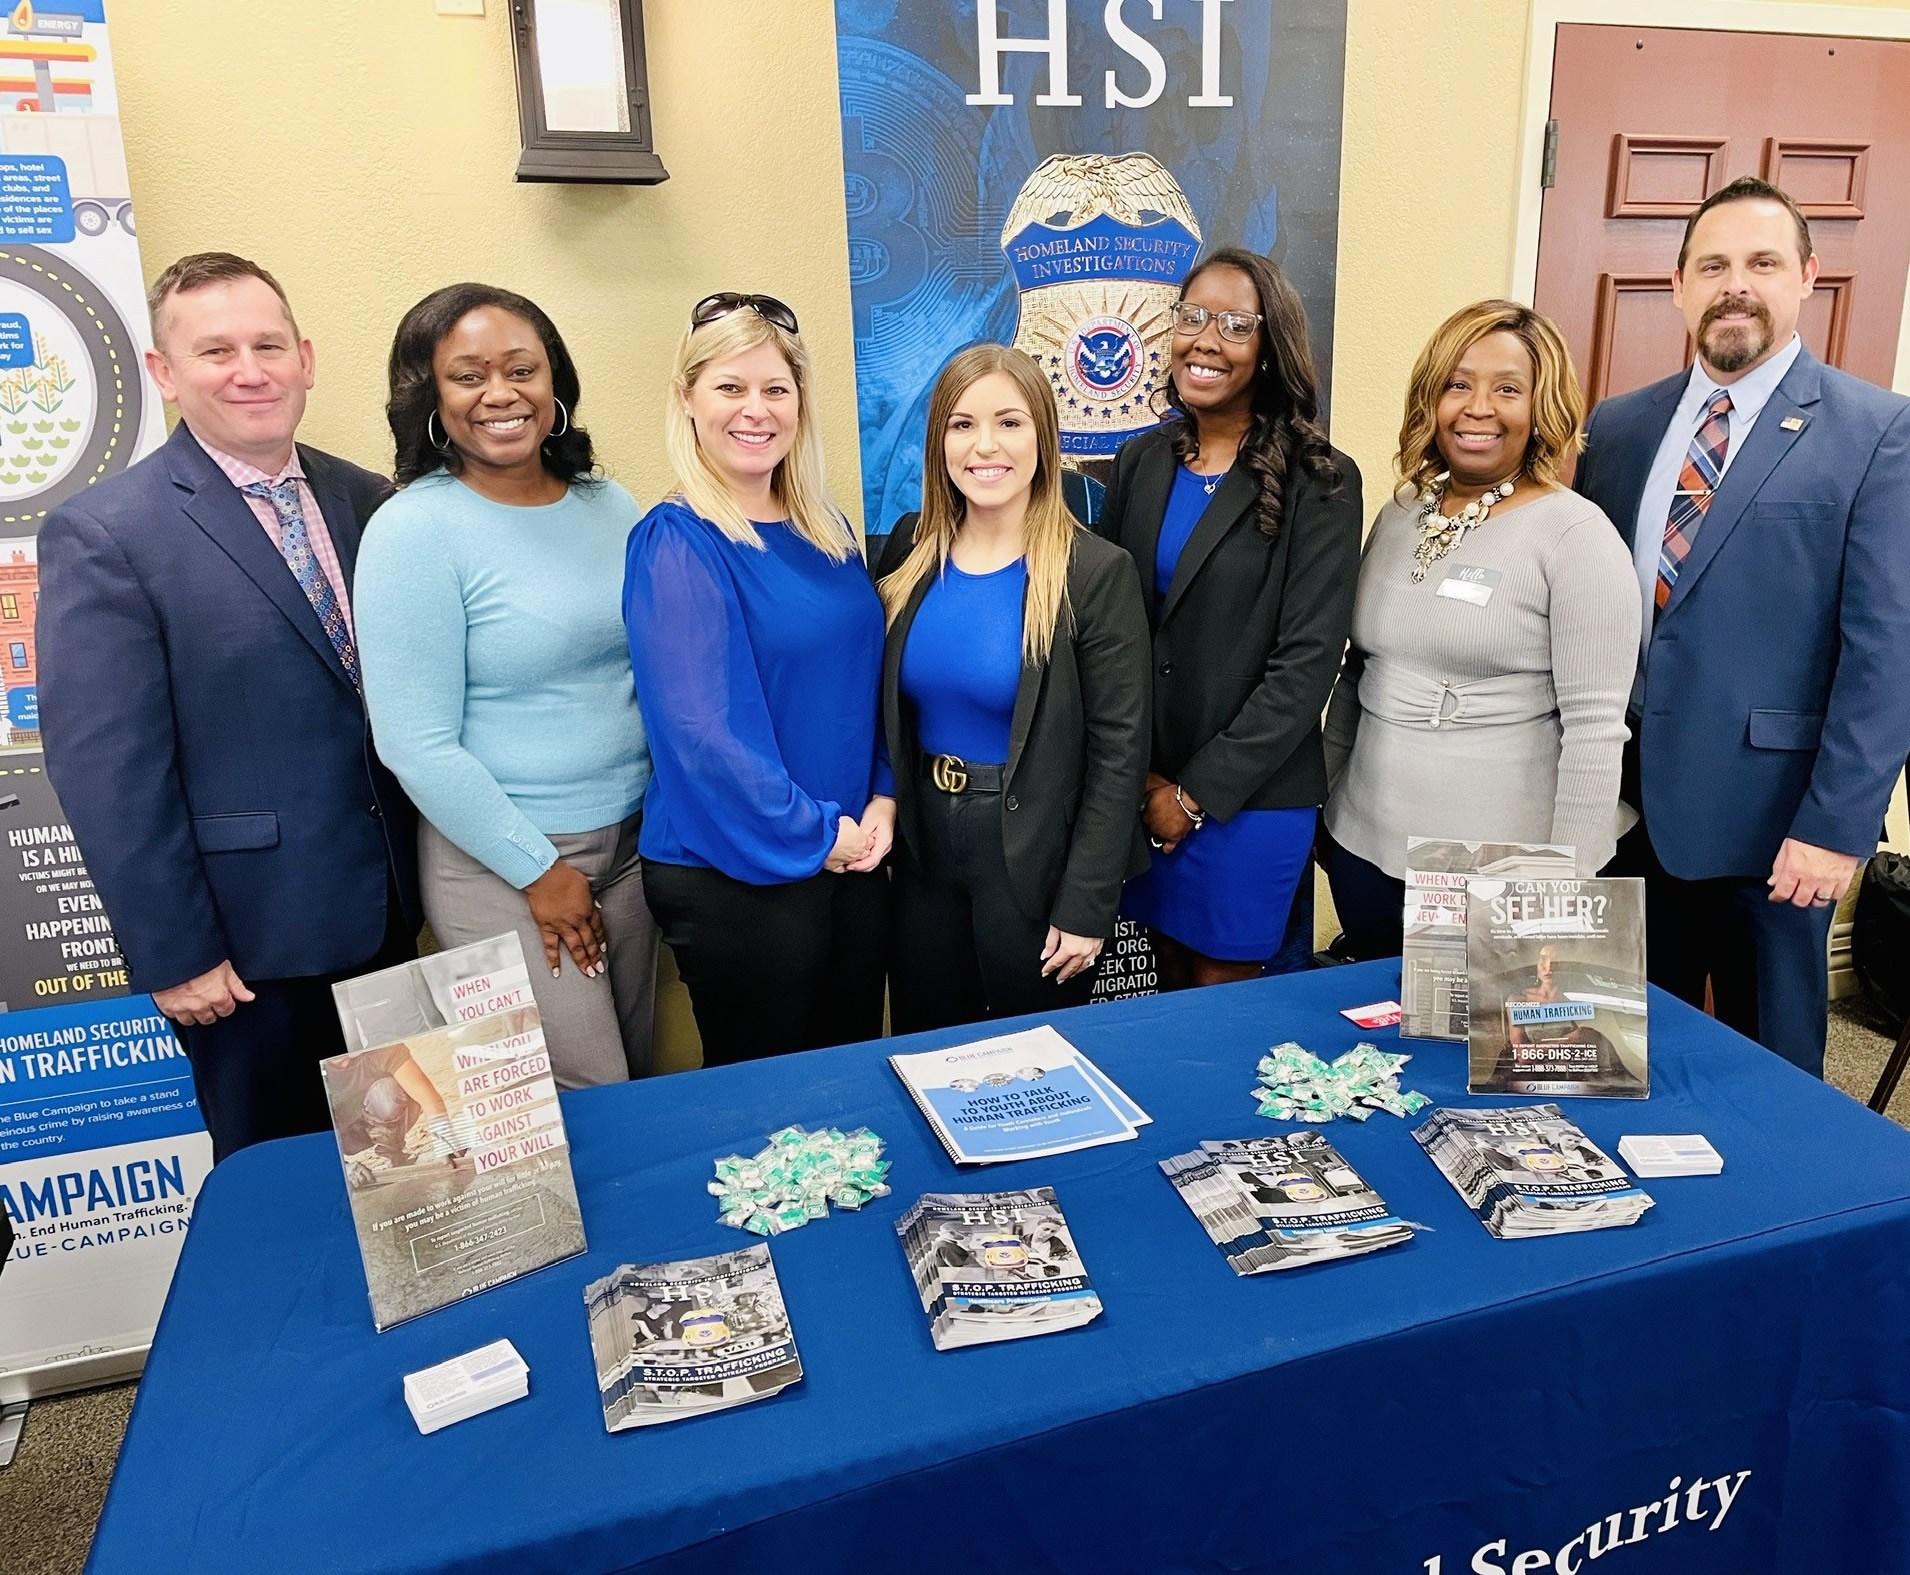 The symposium coincided with National Human Trafficking Awareness Day and Wear Blue Day. More than a dozen law enforcement agencies, nongovernmental organizations and community partners participated.